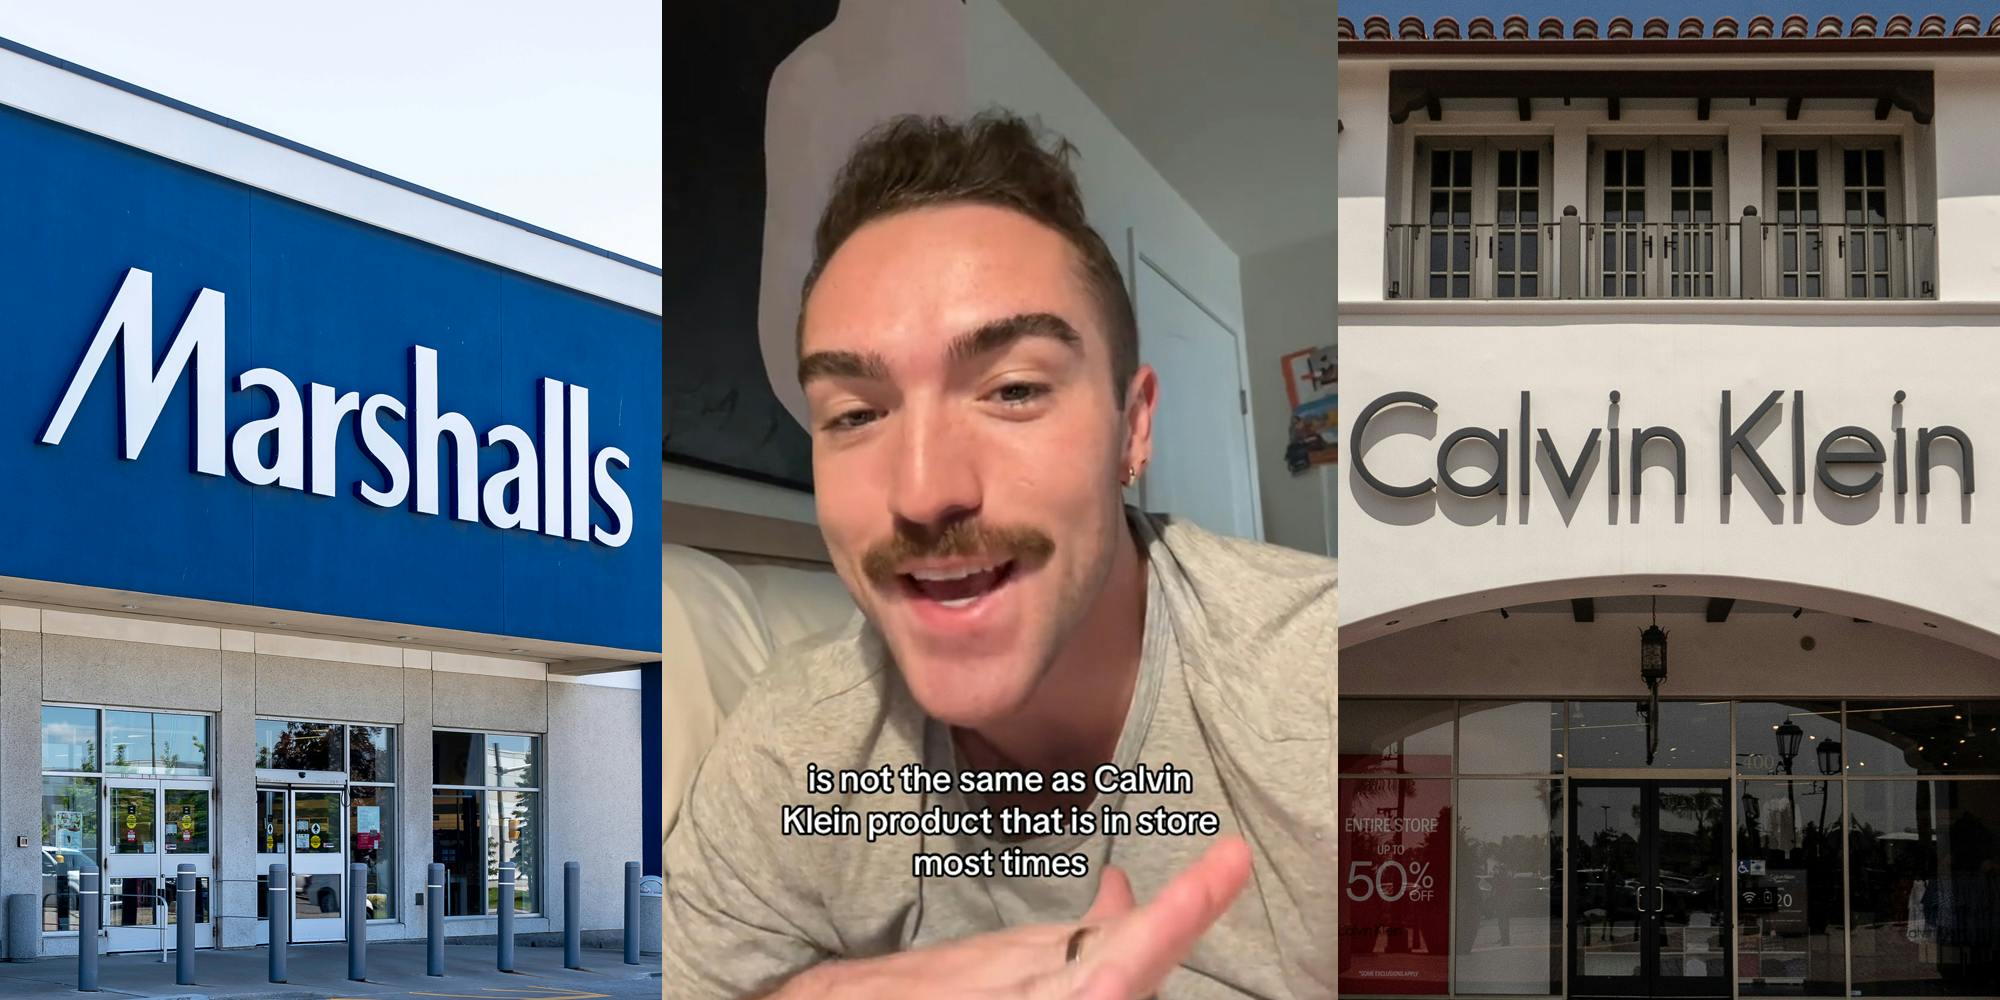 Marshalls store with sign (l) worker speaking with caption "is not the same as Calvin Klein product that is in store most times" (c) Calvin Klein store with sign (r)